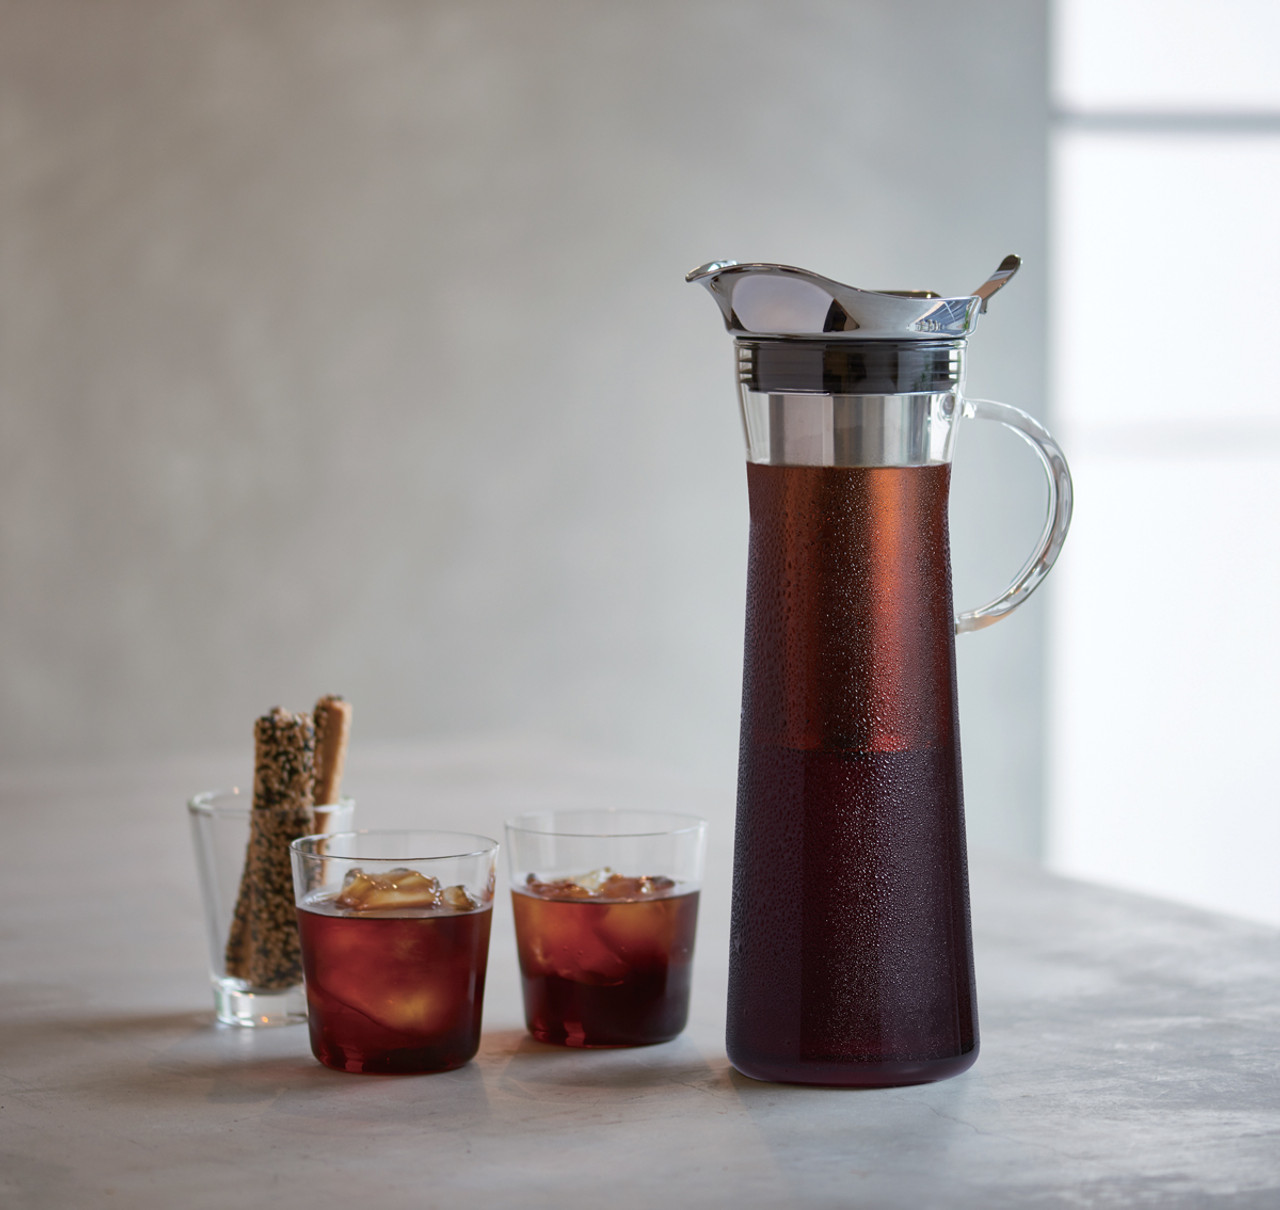 Hario Cold Brew Coffee Pitcher 8 Cup 1000ml - Merae